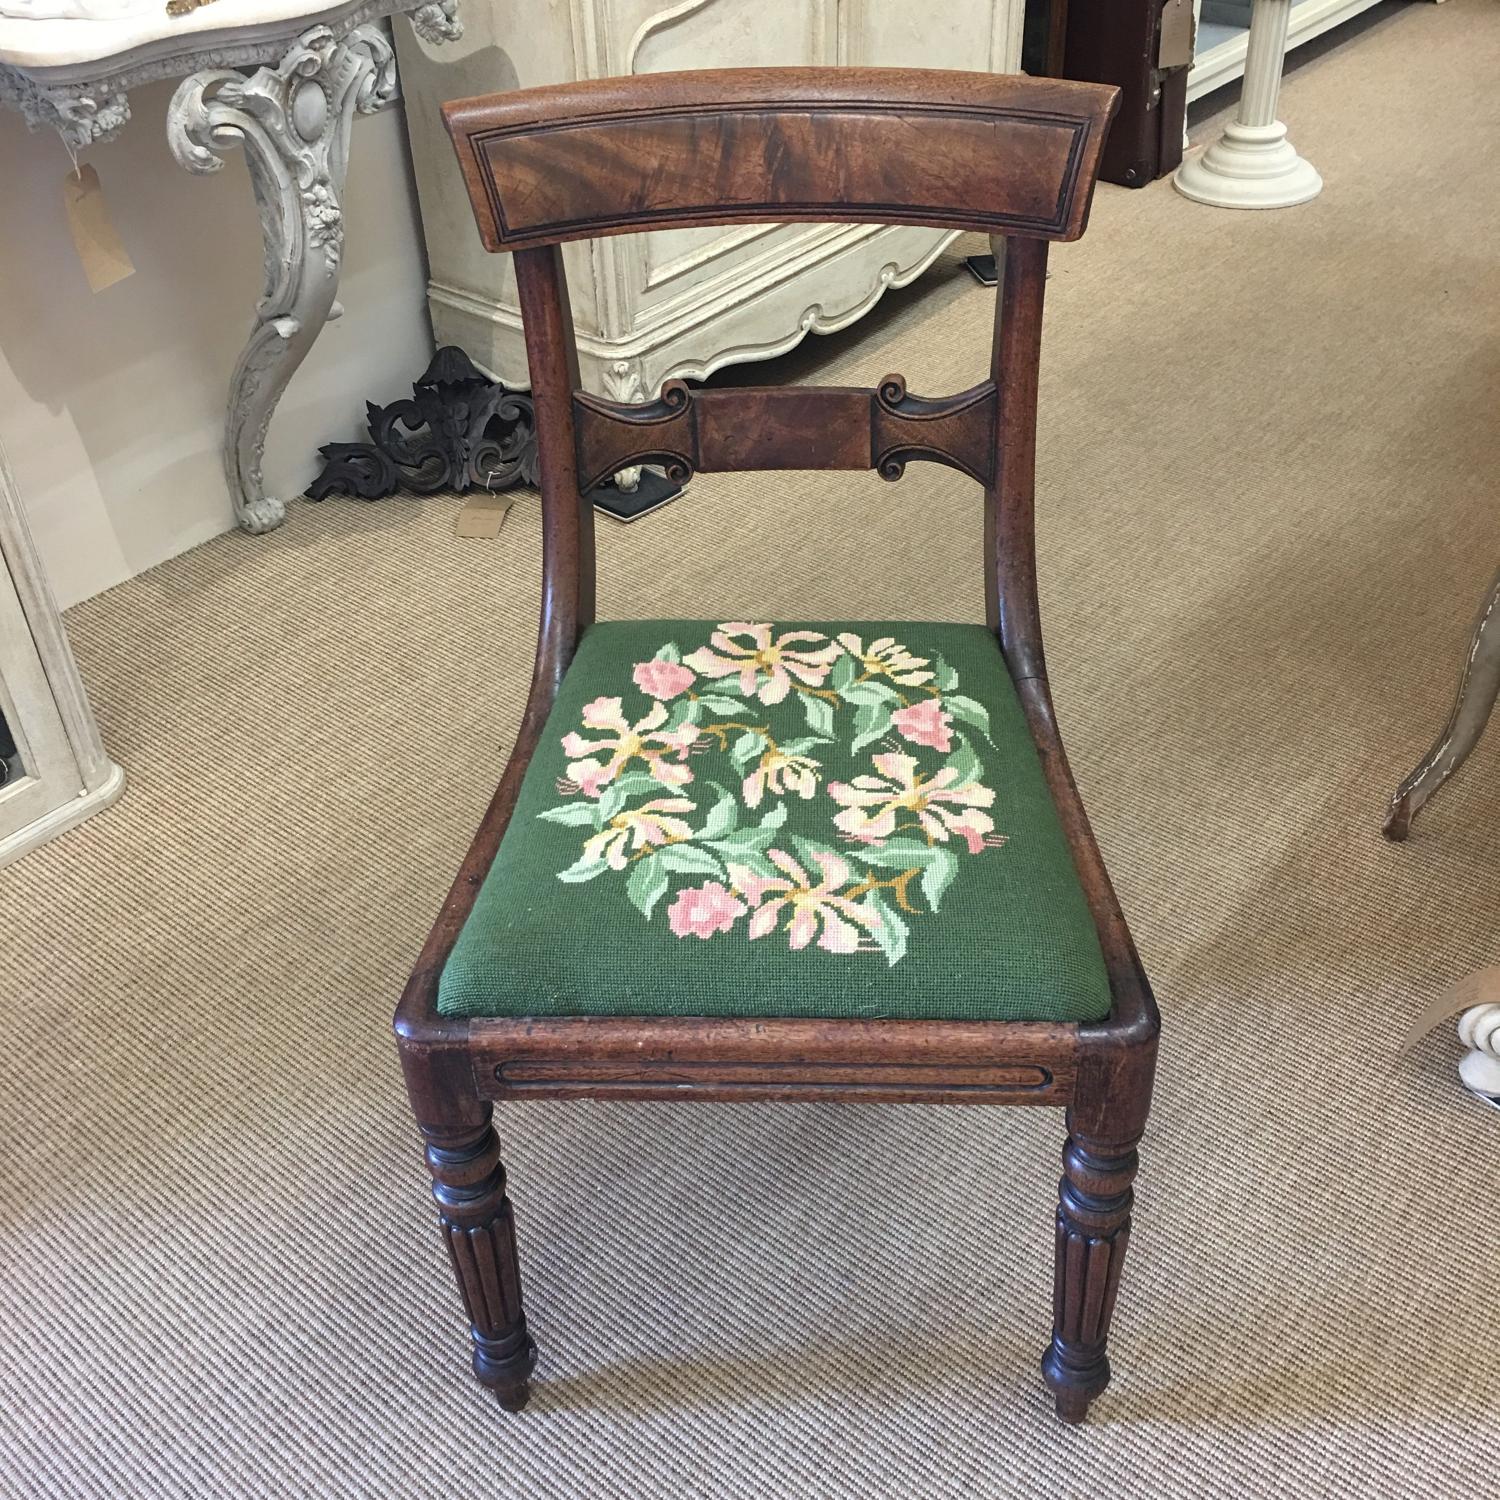 Regency chair with tapestry seat